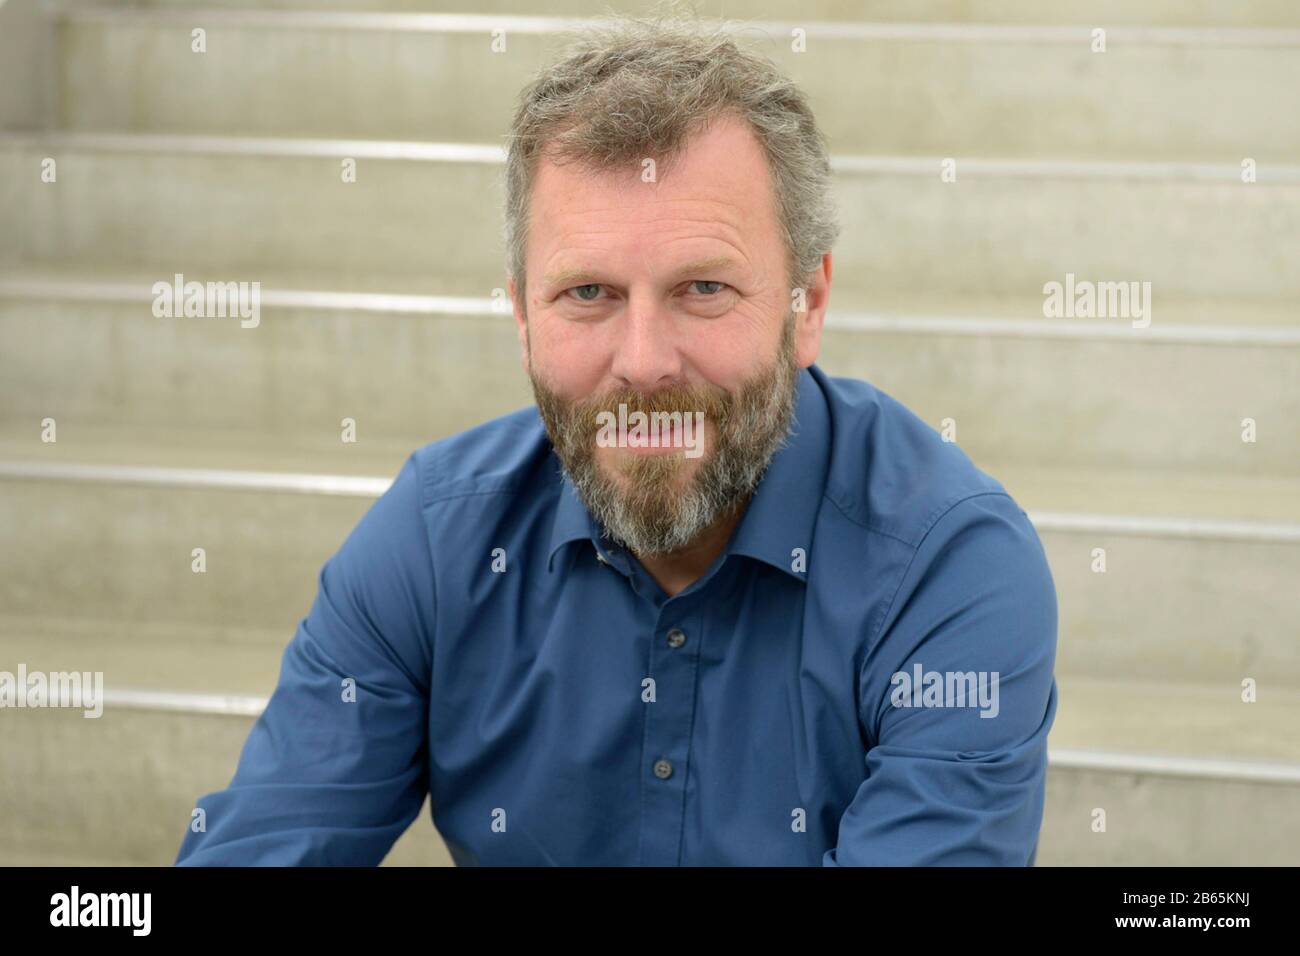 Frankfurt am Main, DEU, 11.10.2018: Portrait Dirk Knipphals, born 1963, editor and author. He studied literature and philosophy. Dirk Knipphals has been literary editor of the 'tageszeitung' since 1999 and lives in Berlin. Stock Photo